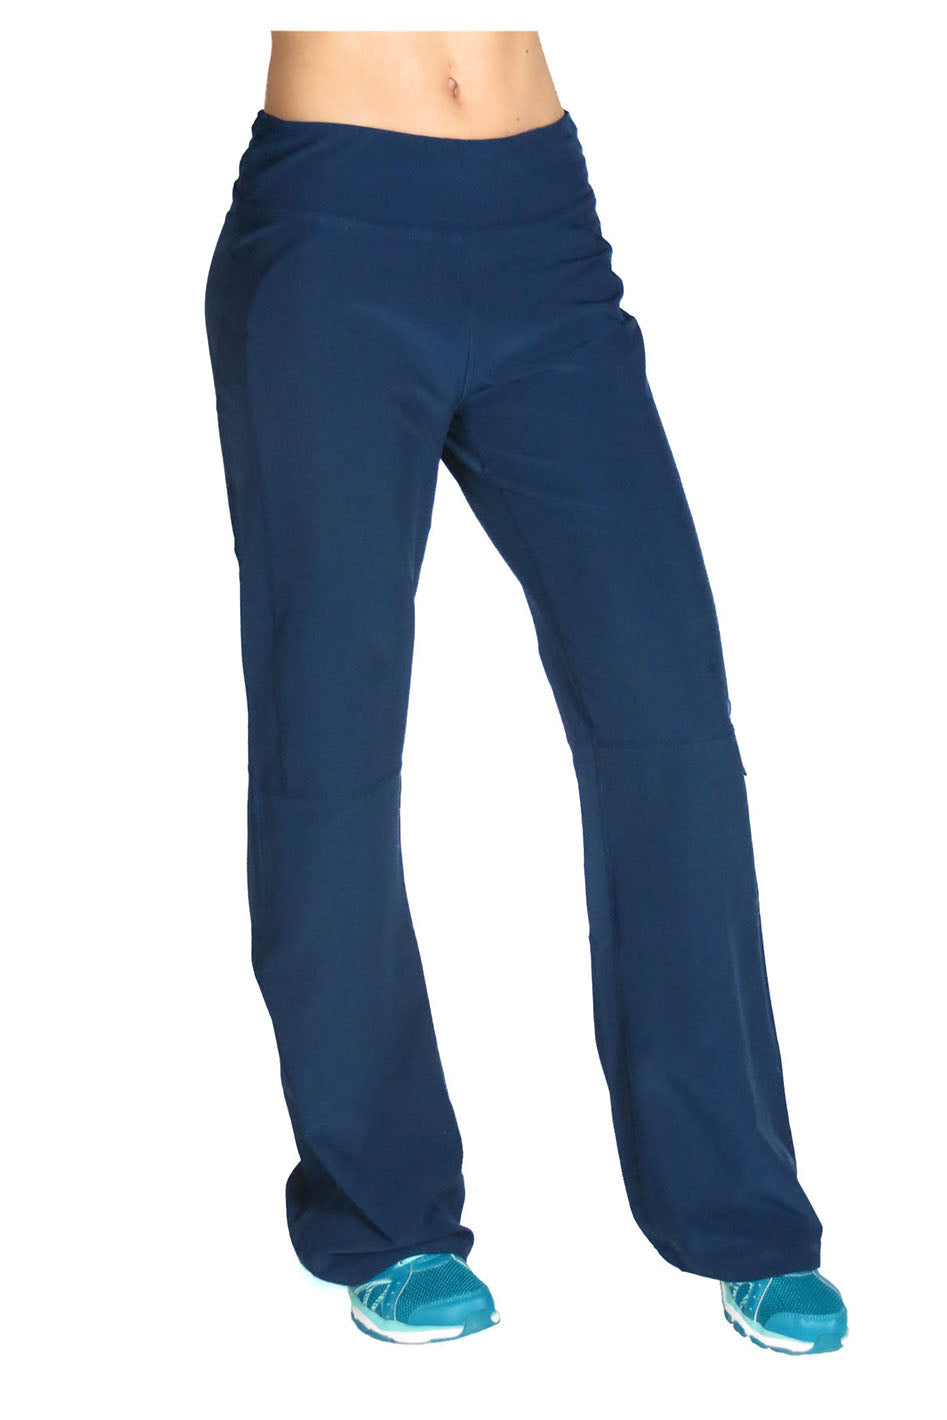 In-Motion Adjustable Woven Pant, Women's Pants